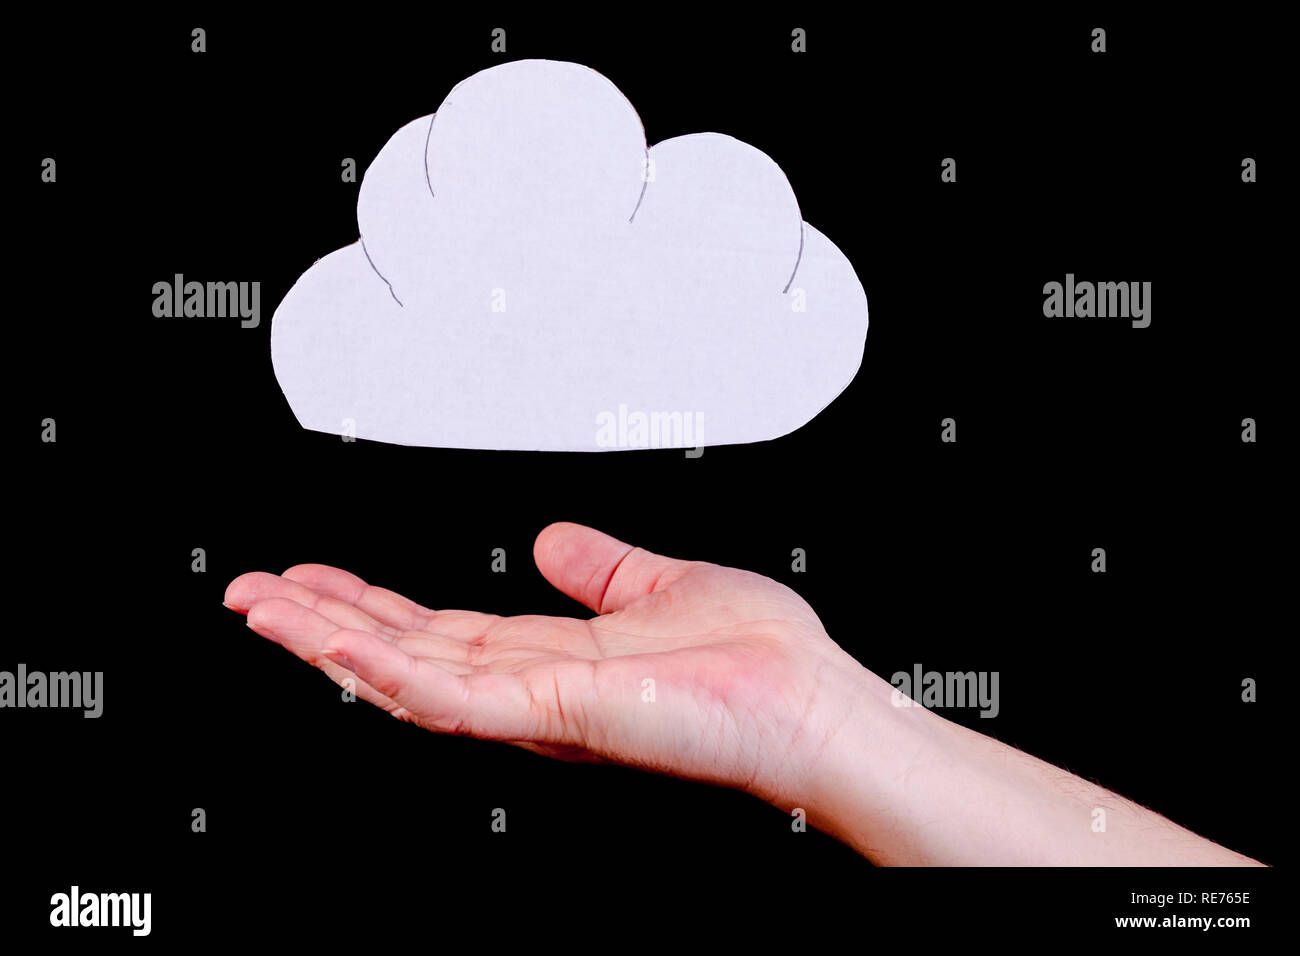 Cloud computing, identity theft and data protection concept. Cloud cutout with a human open hand underneath the cloud. Stock Photo